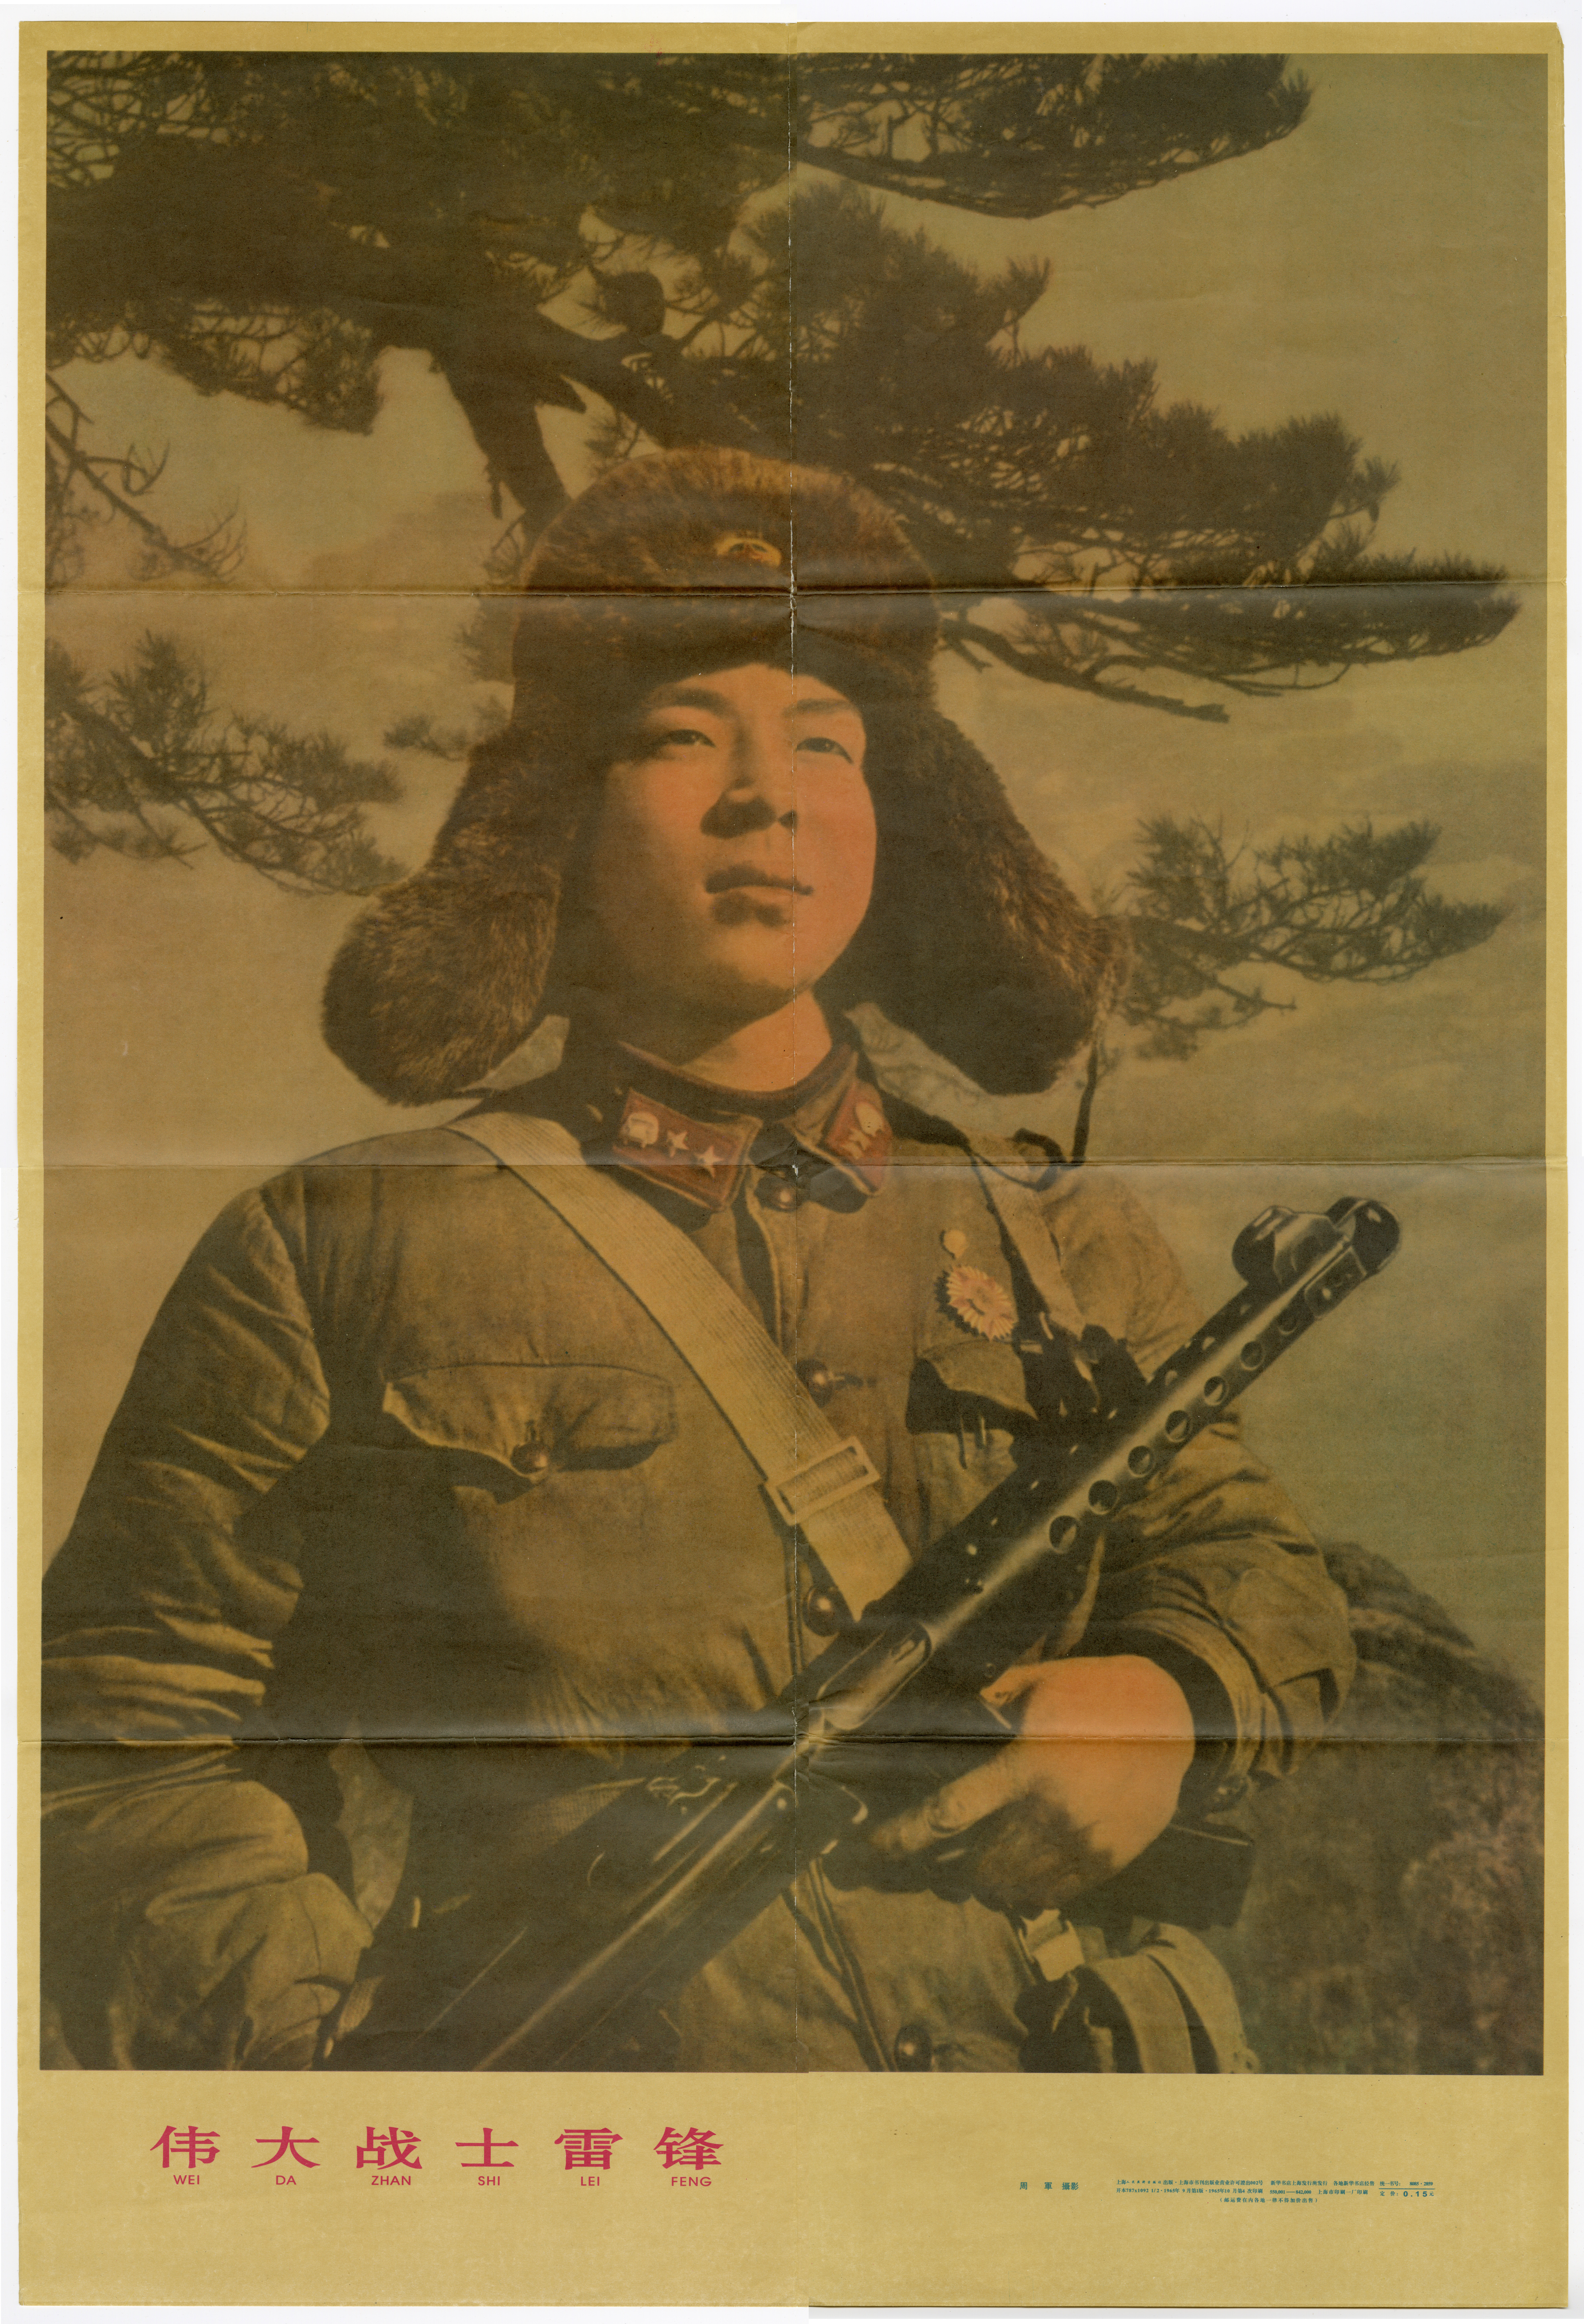 Lei Feng poster, measuring roughly 30"x20" and printed in Shanghai in 1965. Courtesy of Stefan Chiarantano. Museum of Chinese in America (MOCA) Collection.